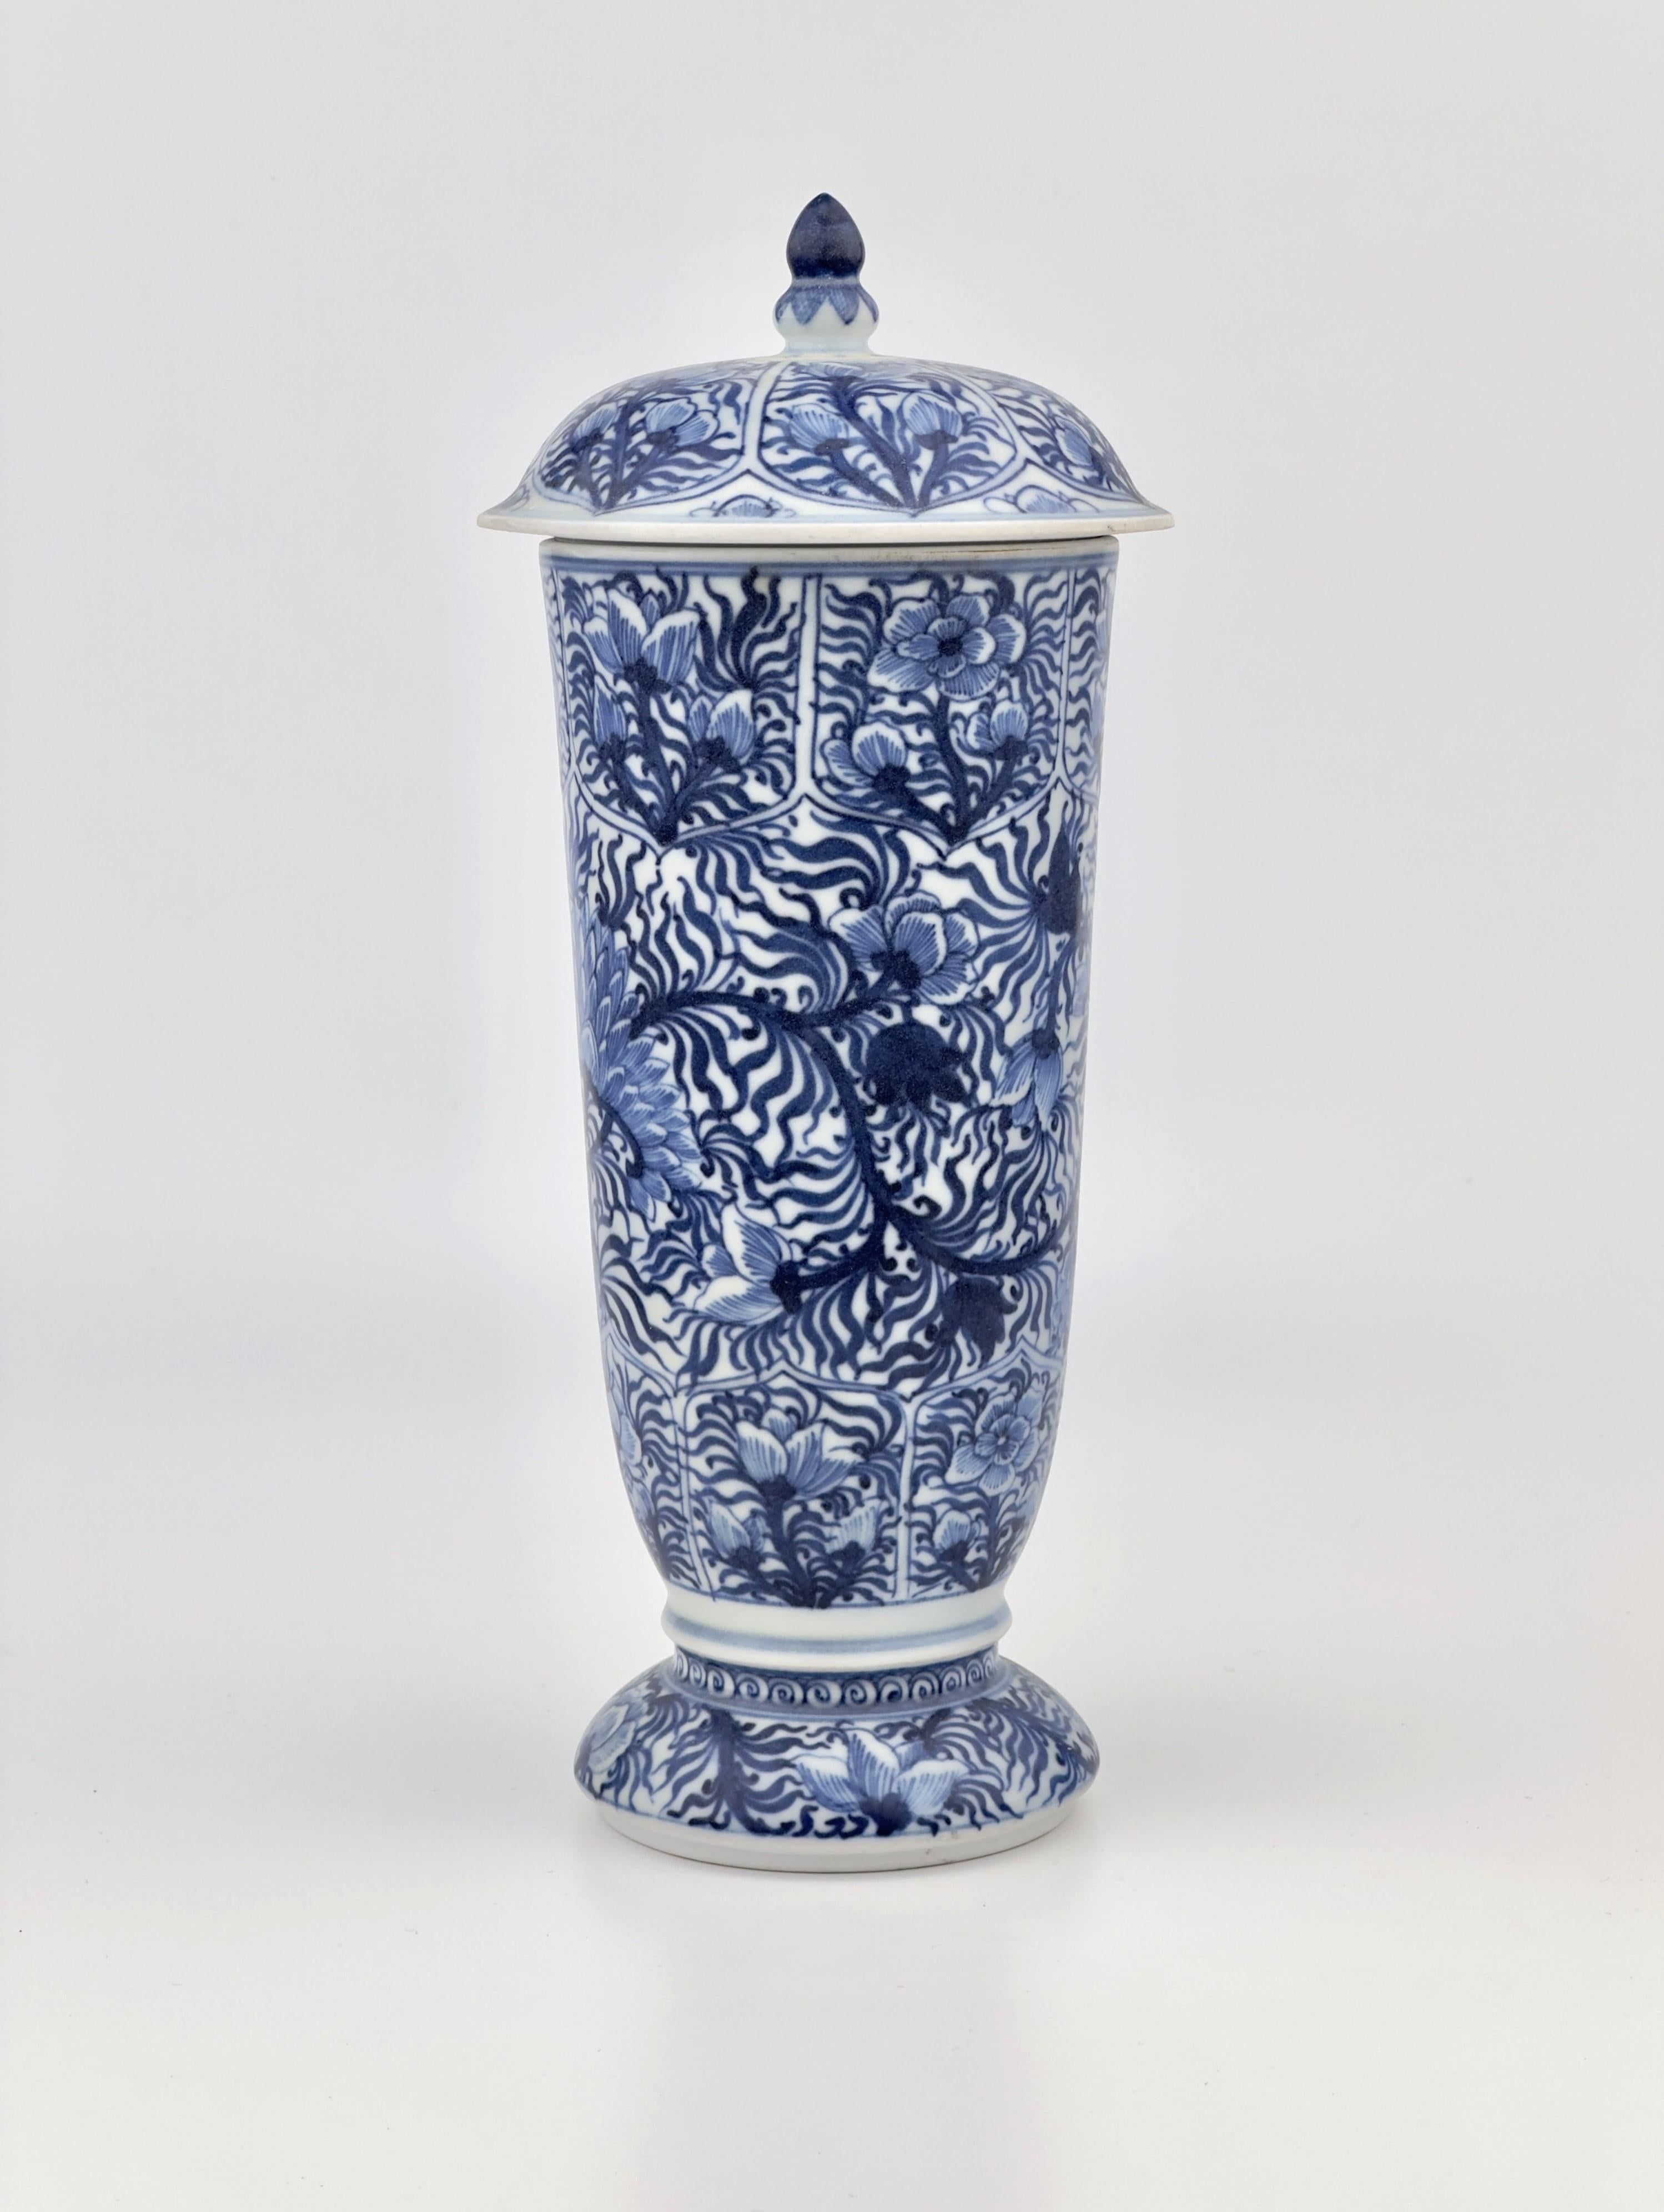 Similar Beaker of this size and with cover is in the Helena Woolworth McCann Collection in the Metropolitan Museum of Art, and is illustrated by C. Le Corbeiller, China Trade Porcelain: Patterns of Exchange, New York, 1974, p. 27, no. 9, where the